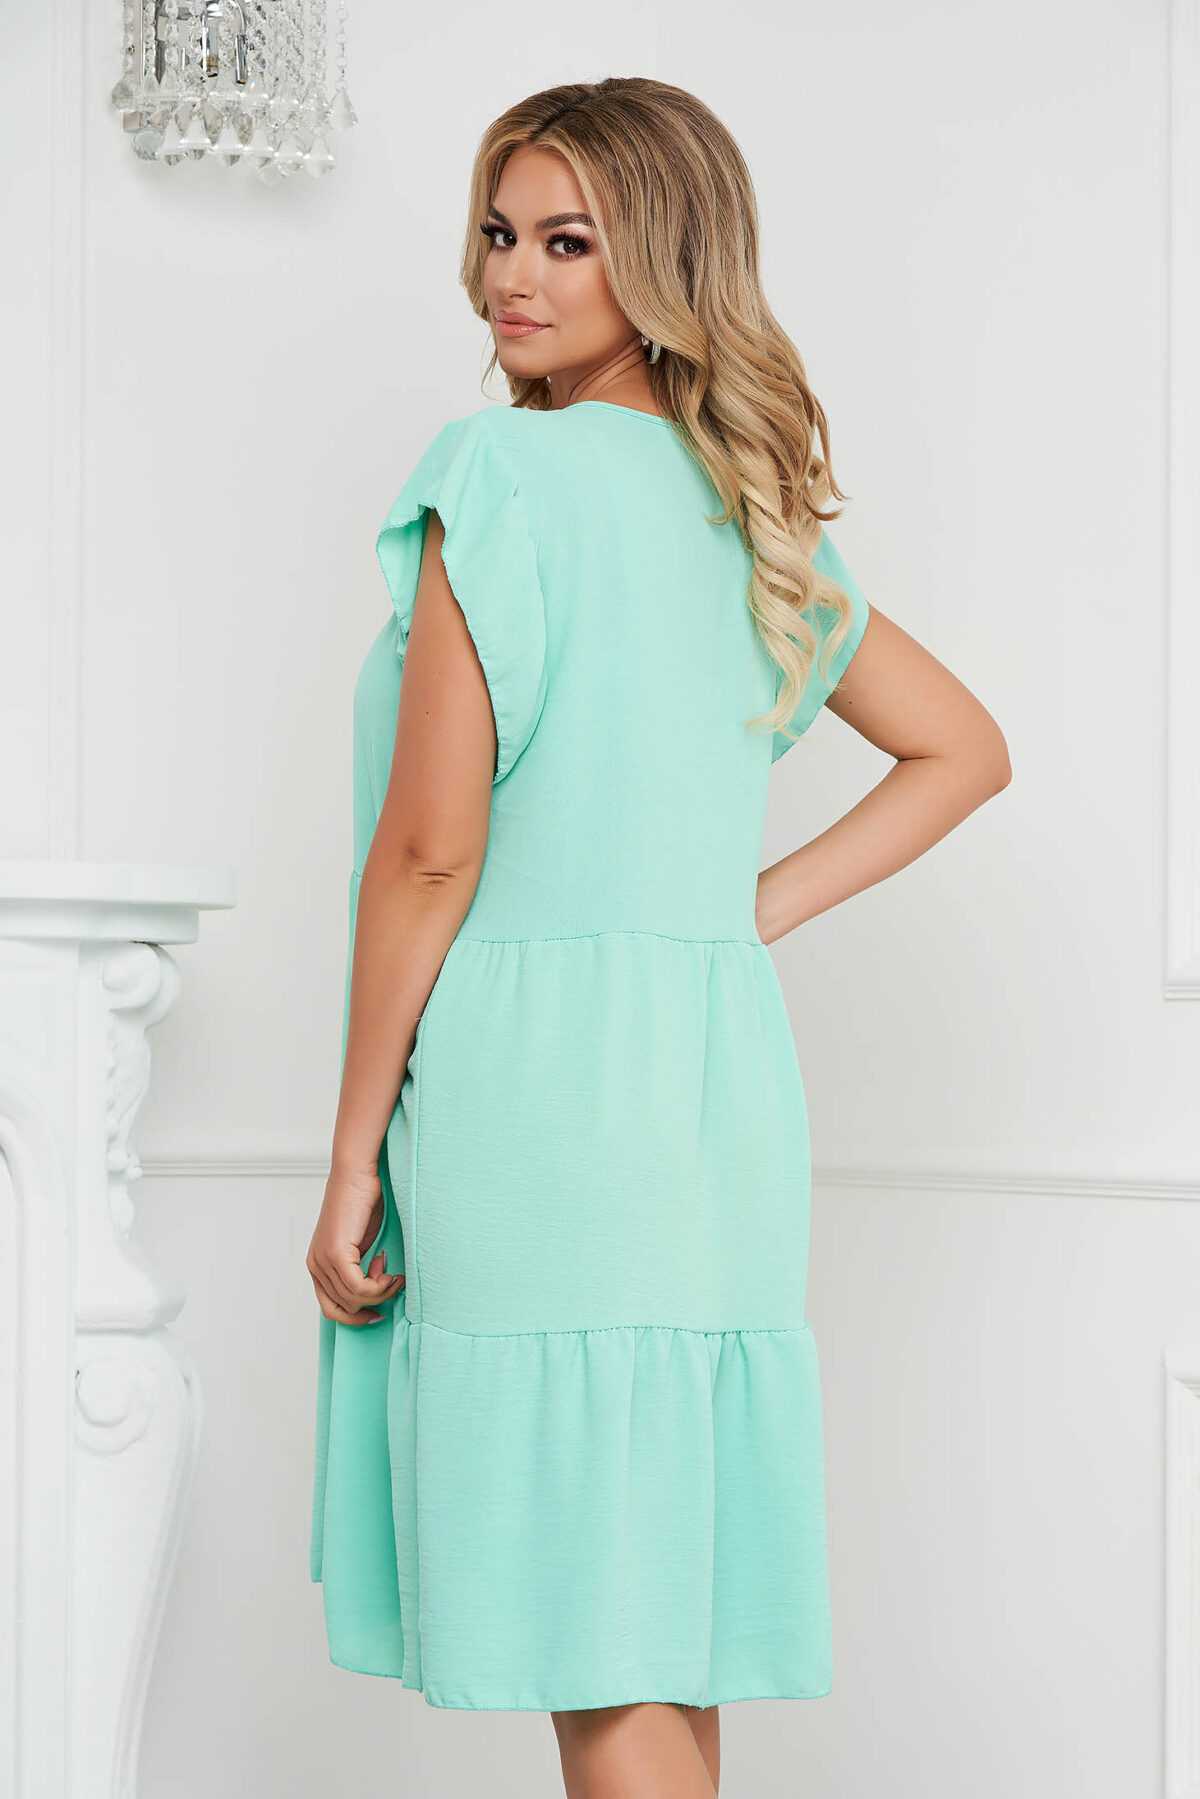 Mint Dress Midi Loose Fit Airy Fabric With Ruffle Details